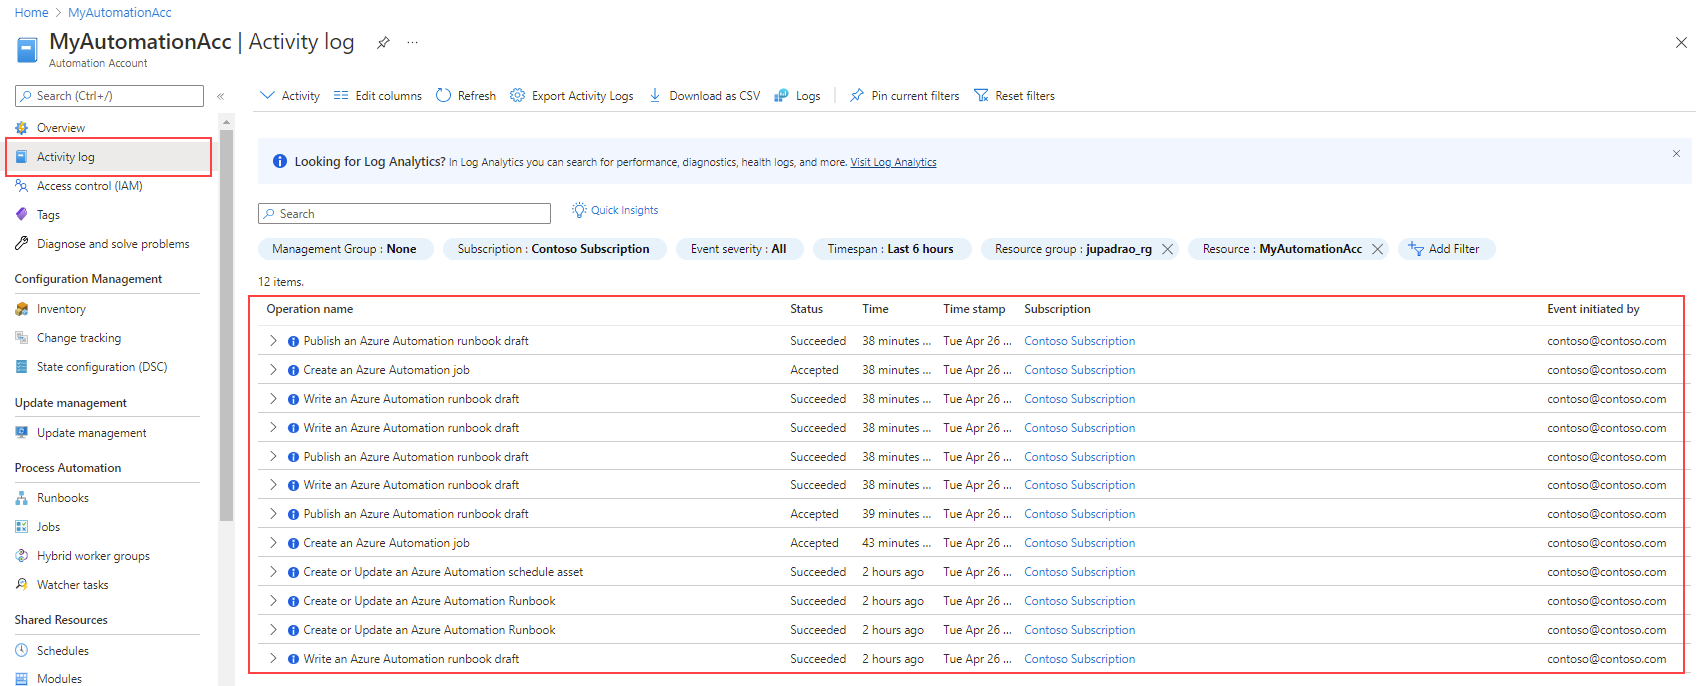 Screenshot of the activity log for an Azure Automation account.